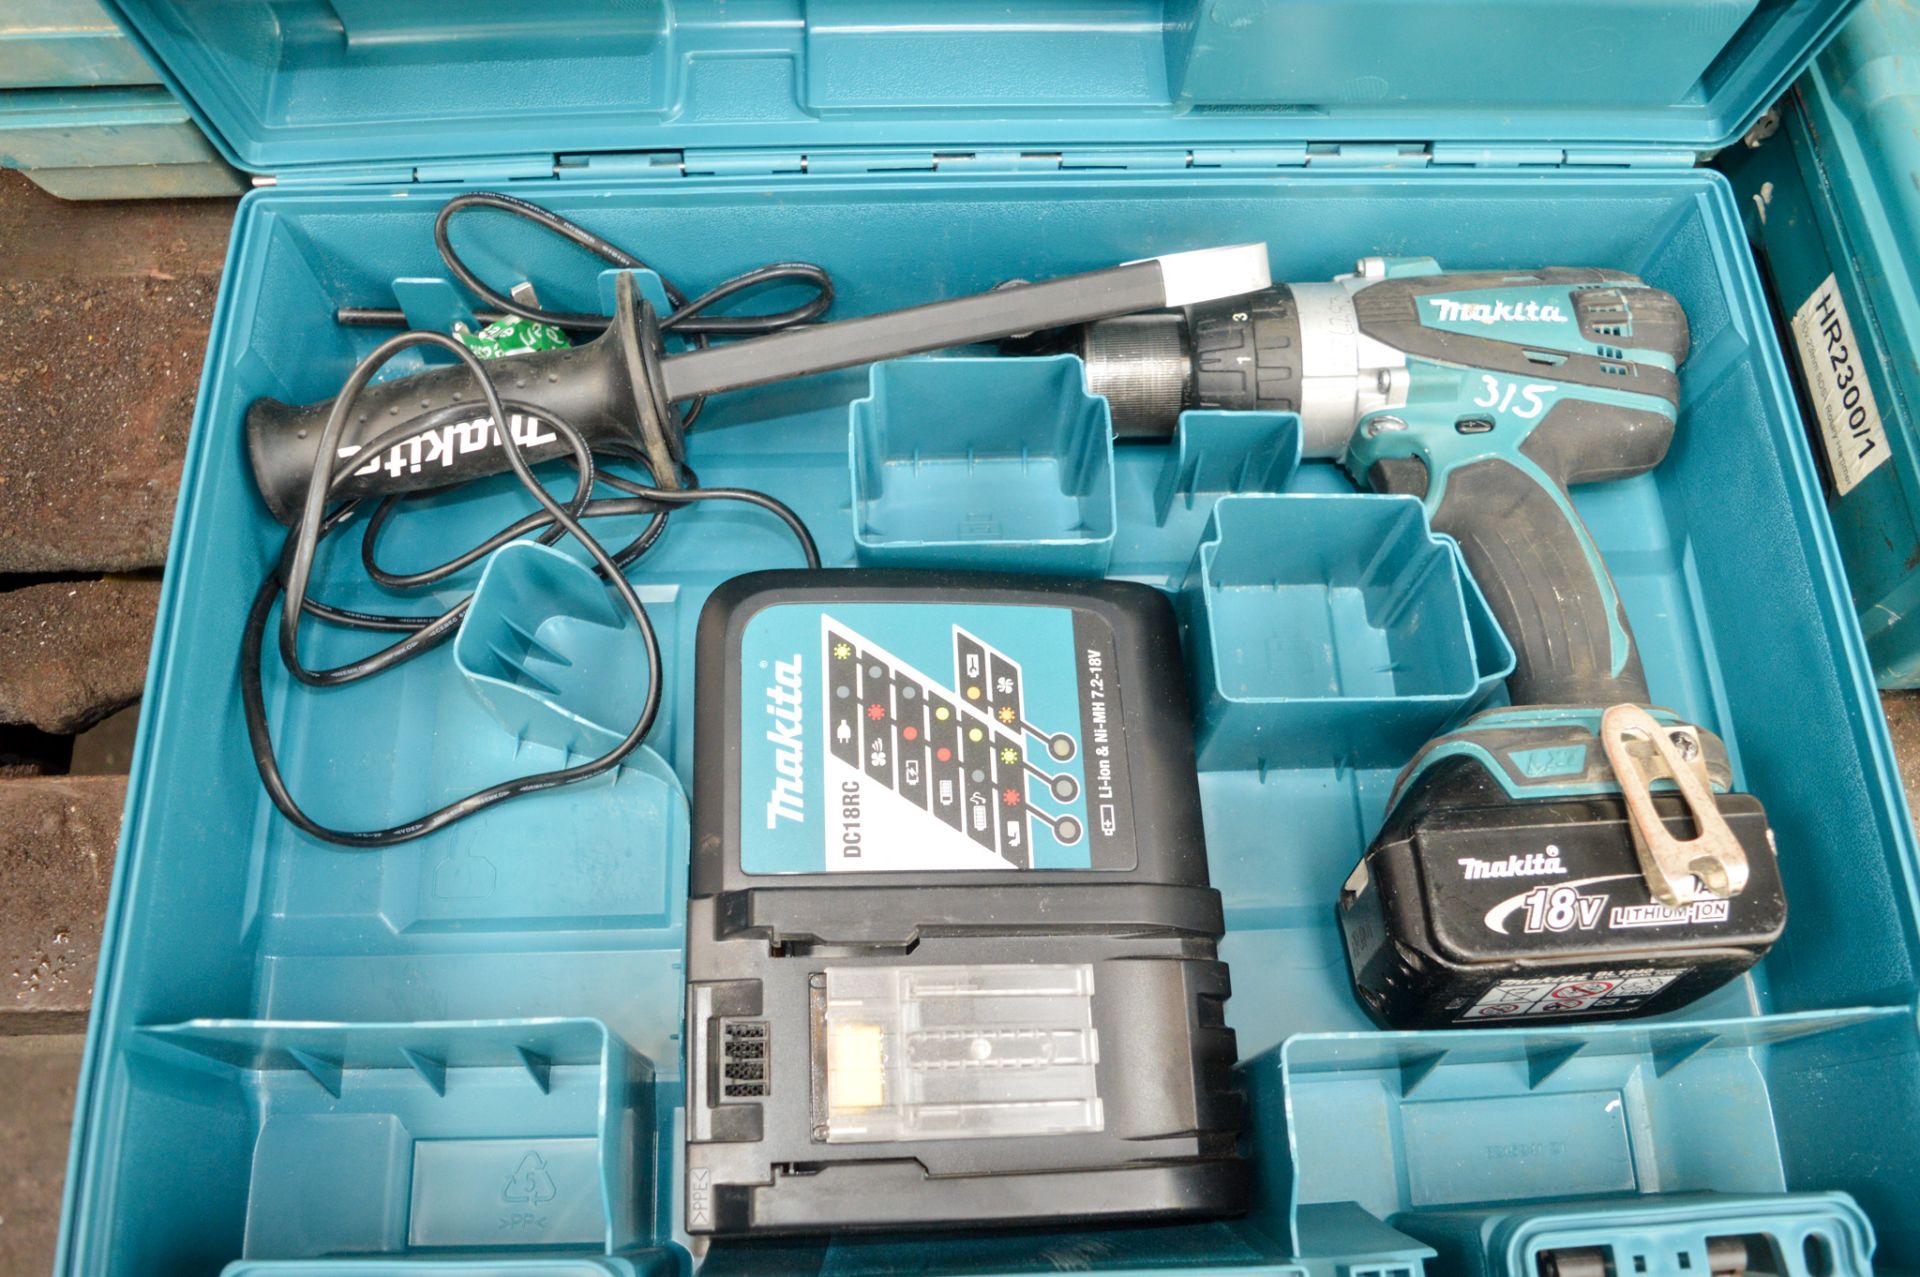 Makita 18v cordless power drill c/w 2 batteries, charger & carry case A636283